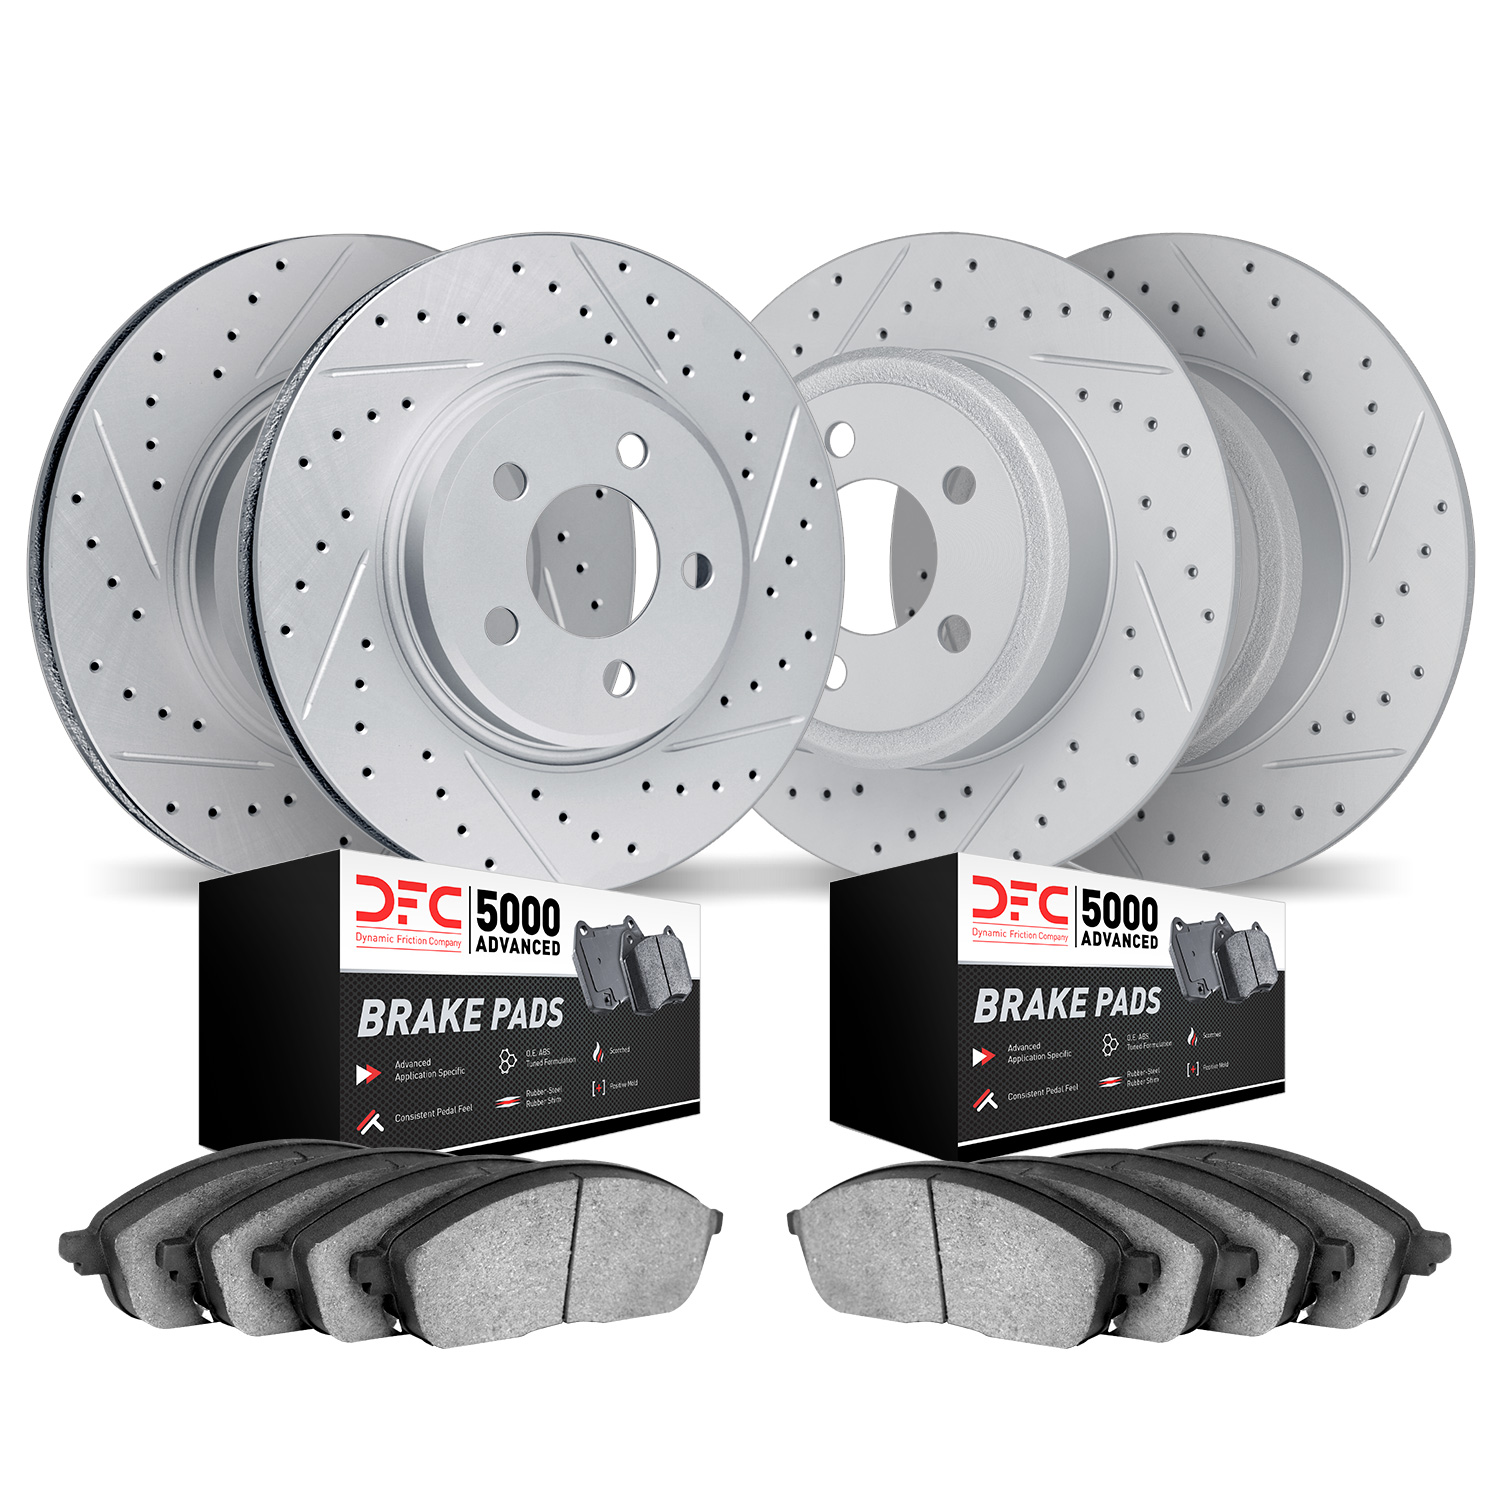 2504-45030 Geoperformance Drilled/Slotted Rotors w/5000 Advanced Brake Pads Kit, 2016-2018 GM, Position: Front and Rear